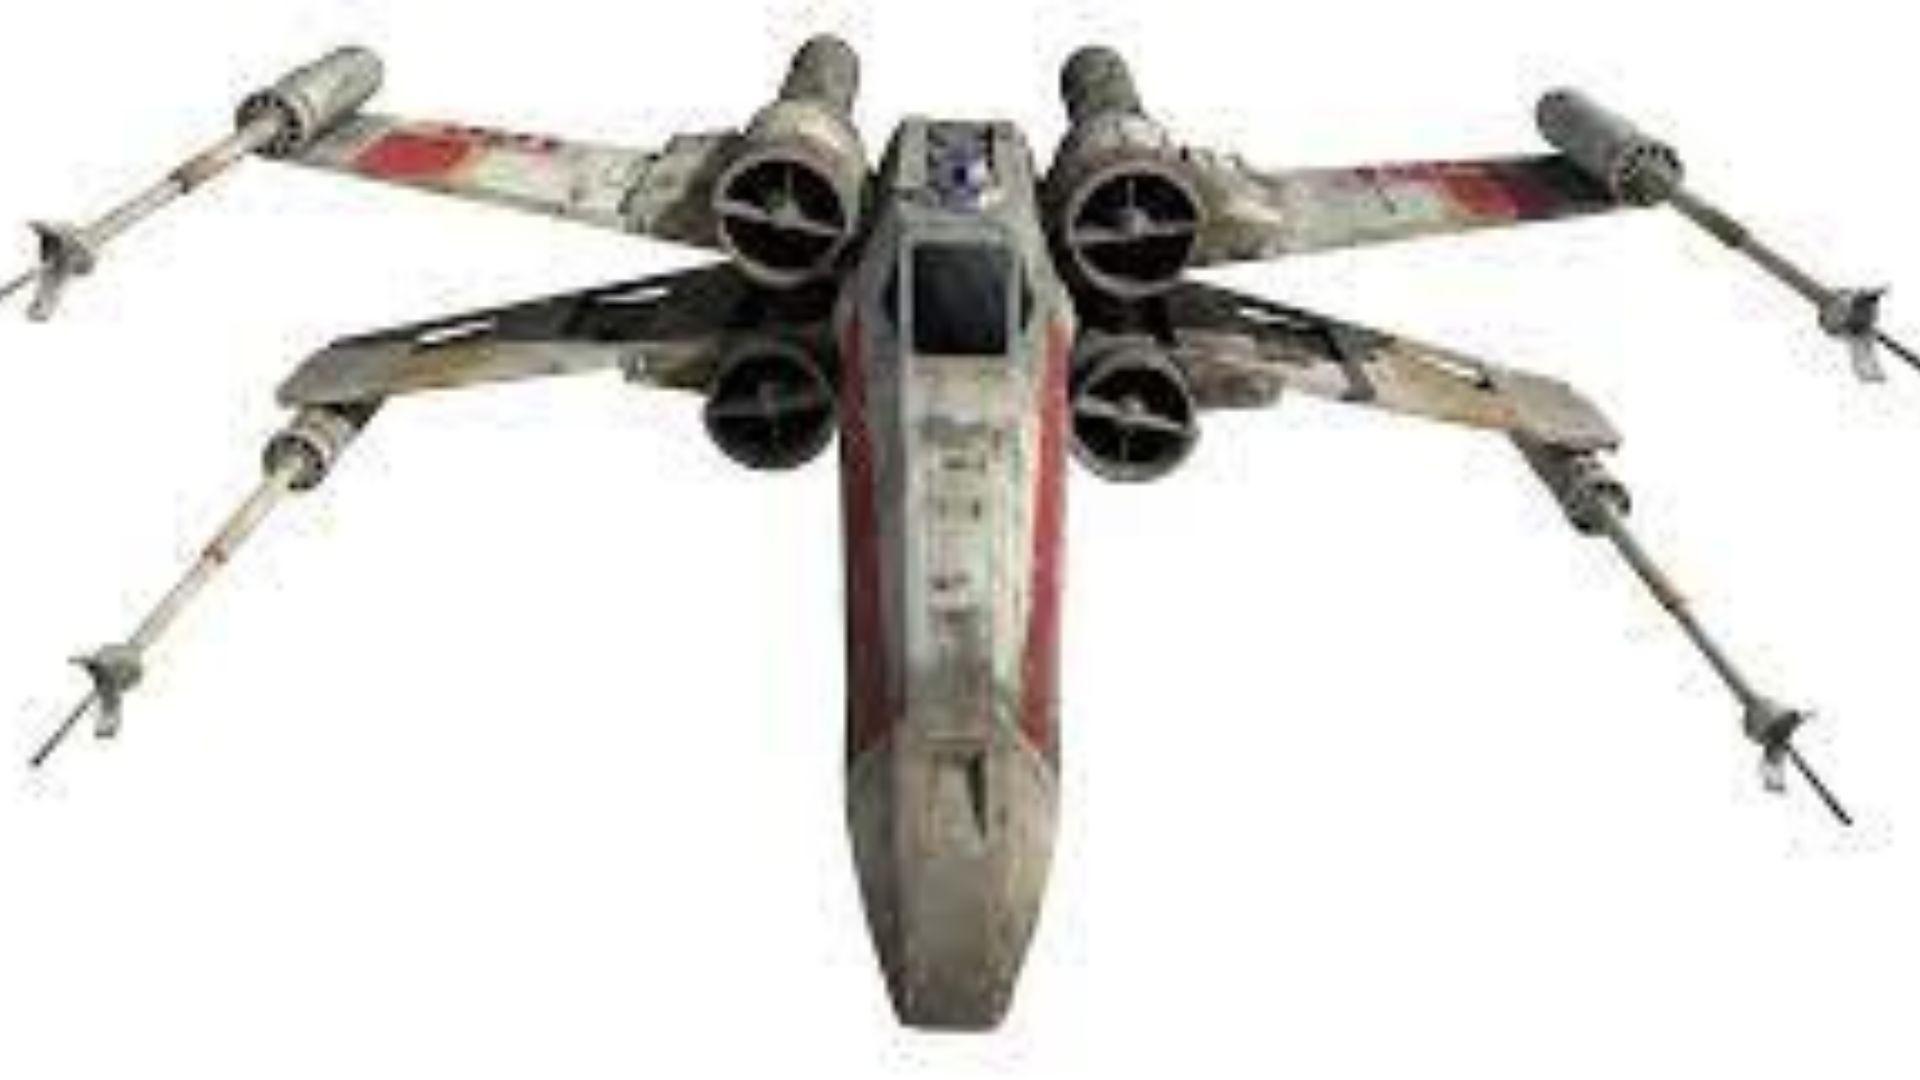 X-wing starfighter from the movie Star Wars